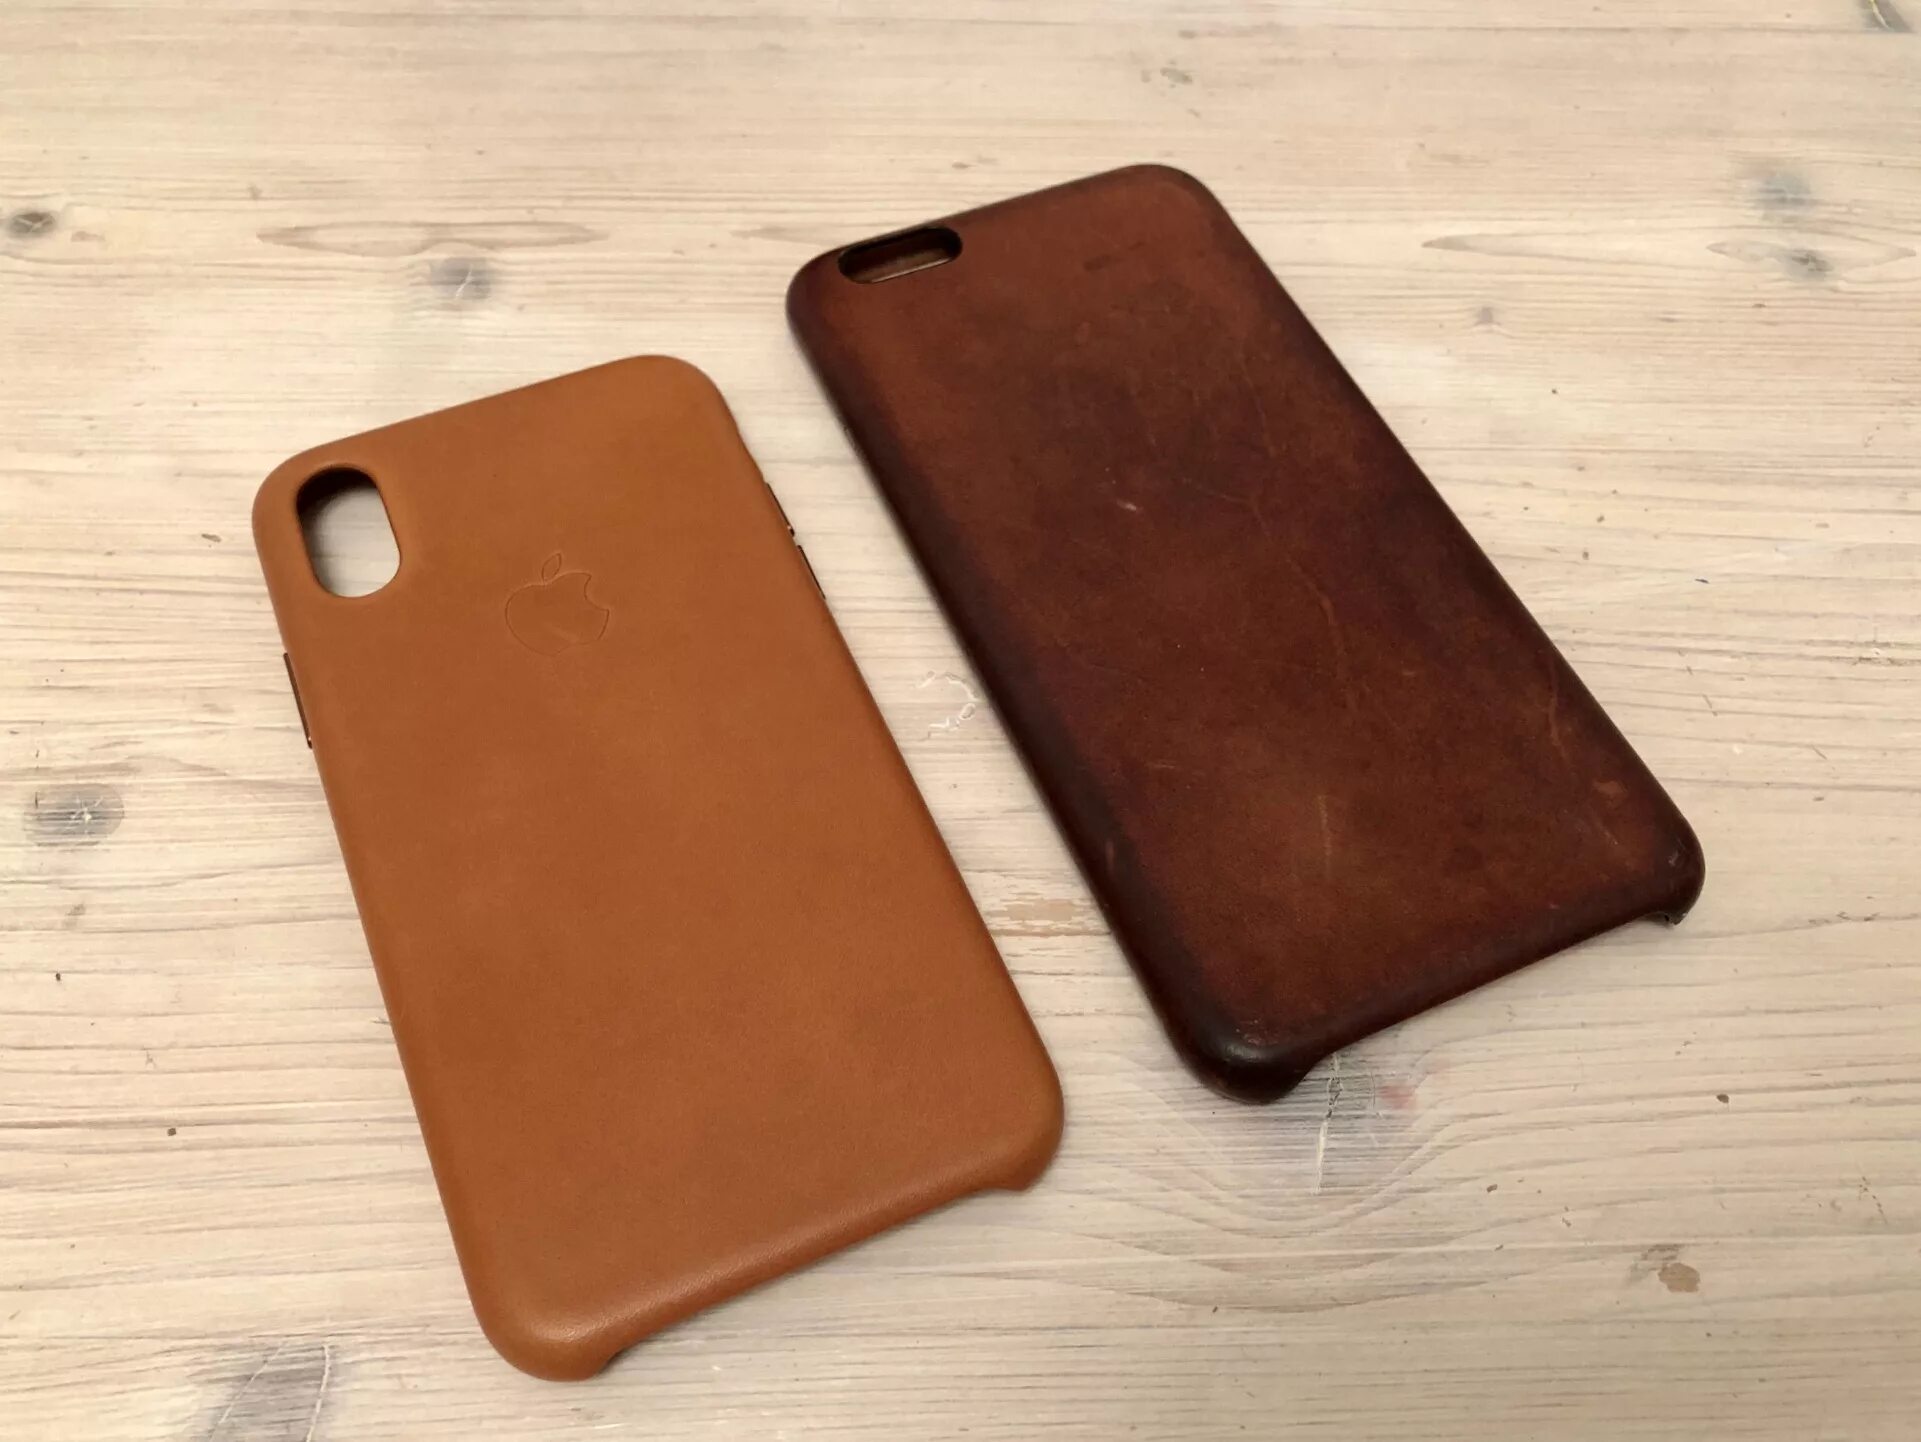 Iphone 13 Leather Case патина. Iphone 12 Leather Case. Чехлы Apple iphone 11 Leather Case патина. Apple Leather Case iphone. Чехол apple leather